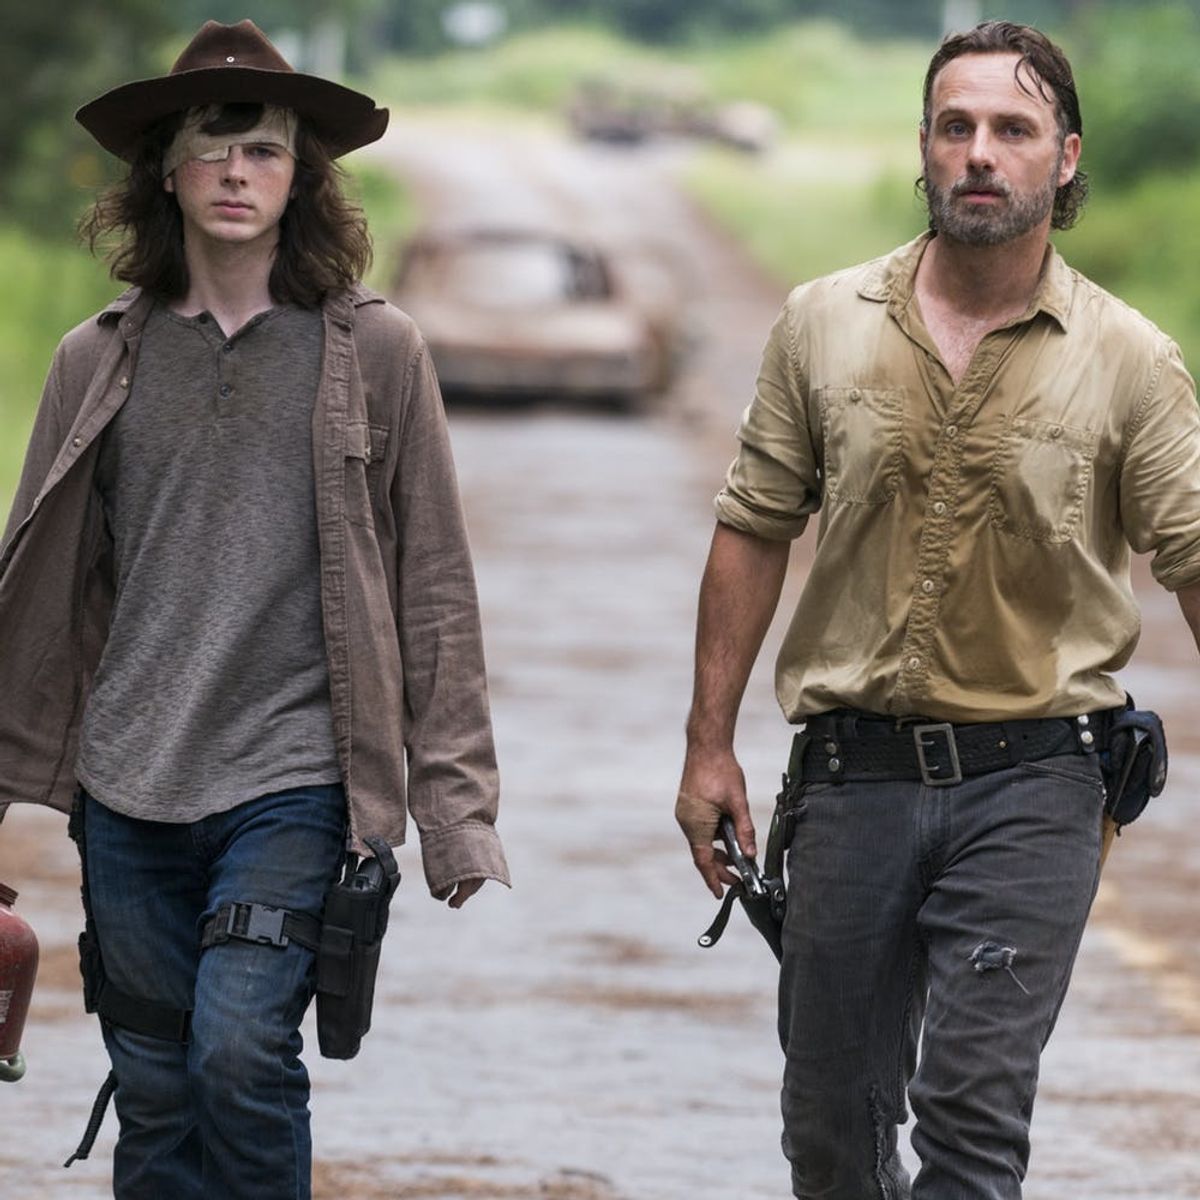 ‘The Walking Dead’ Just Pulled Off a Shocking Twist and Fans Are Losing It